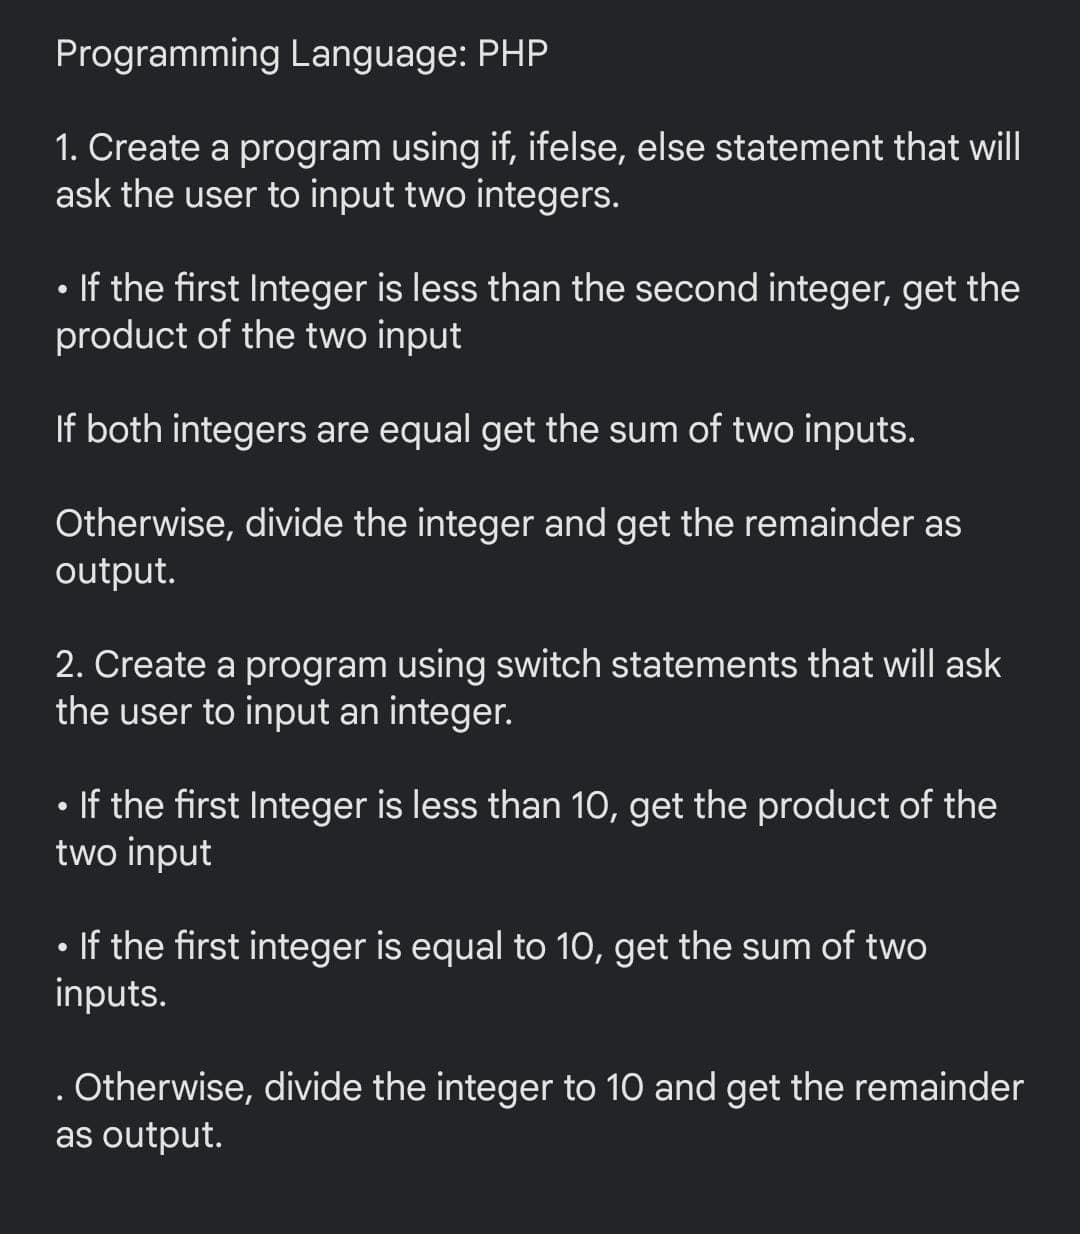 Programming Language: PHP
1. Create a program using if, ifelse, else statement that will
ask the user to input two integers.
• If the first Integer is less than the second integer, get the
product of the two input
If both integers are equal get the sum of two inputs.
Otherwise, divide the integer and get the remainder as
output.
2. Create a program using switch statements that will ask
the user to input an integer.
• If the first Integer is less than 10, get the product of the
two input
If the first integer is equal to 1O, get the sum of two
inputs.
. Otherwise, divide the integer to 10 and get the remainder
as output.
